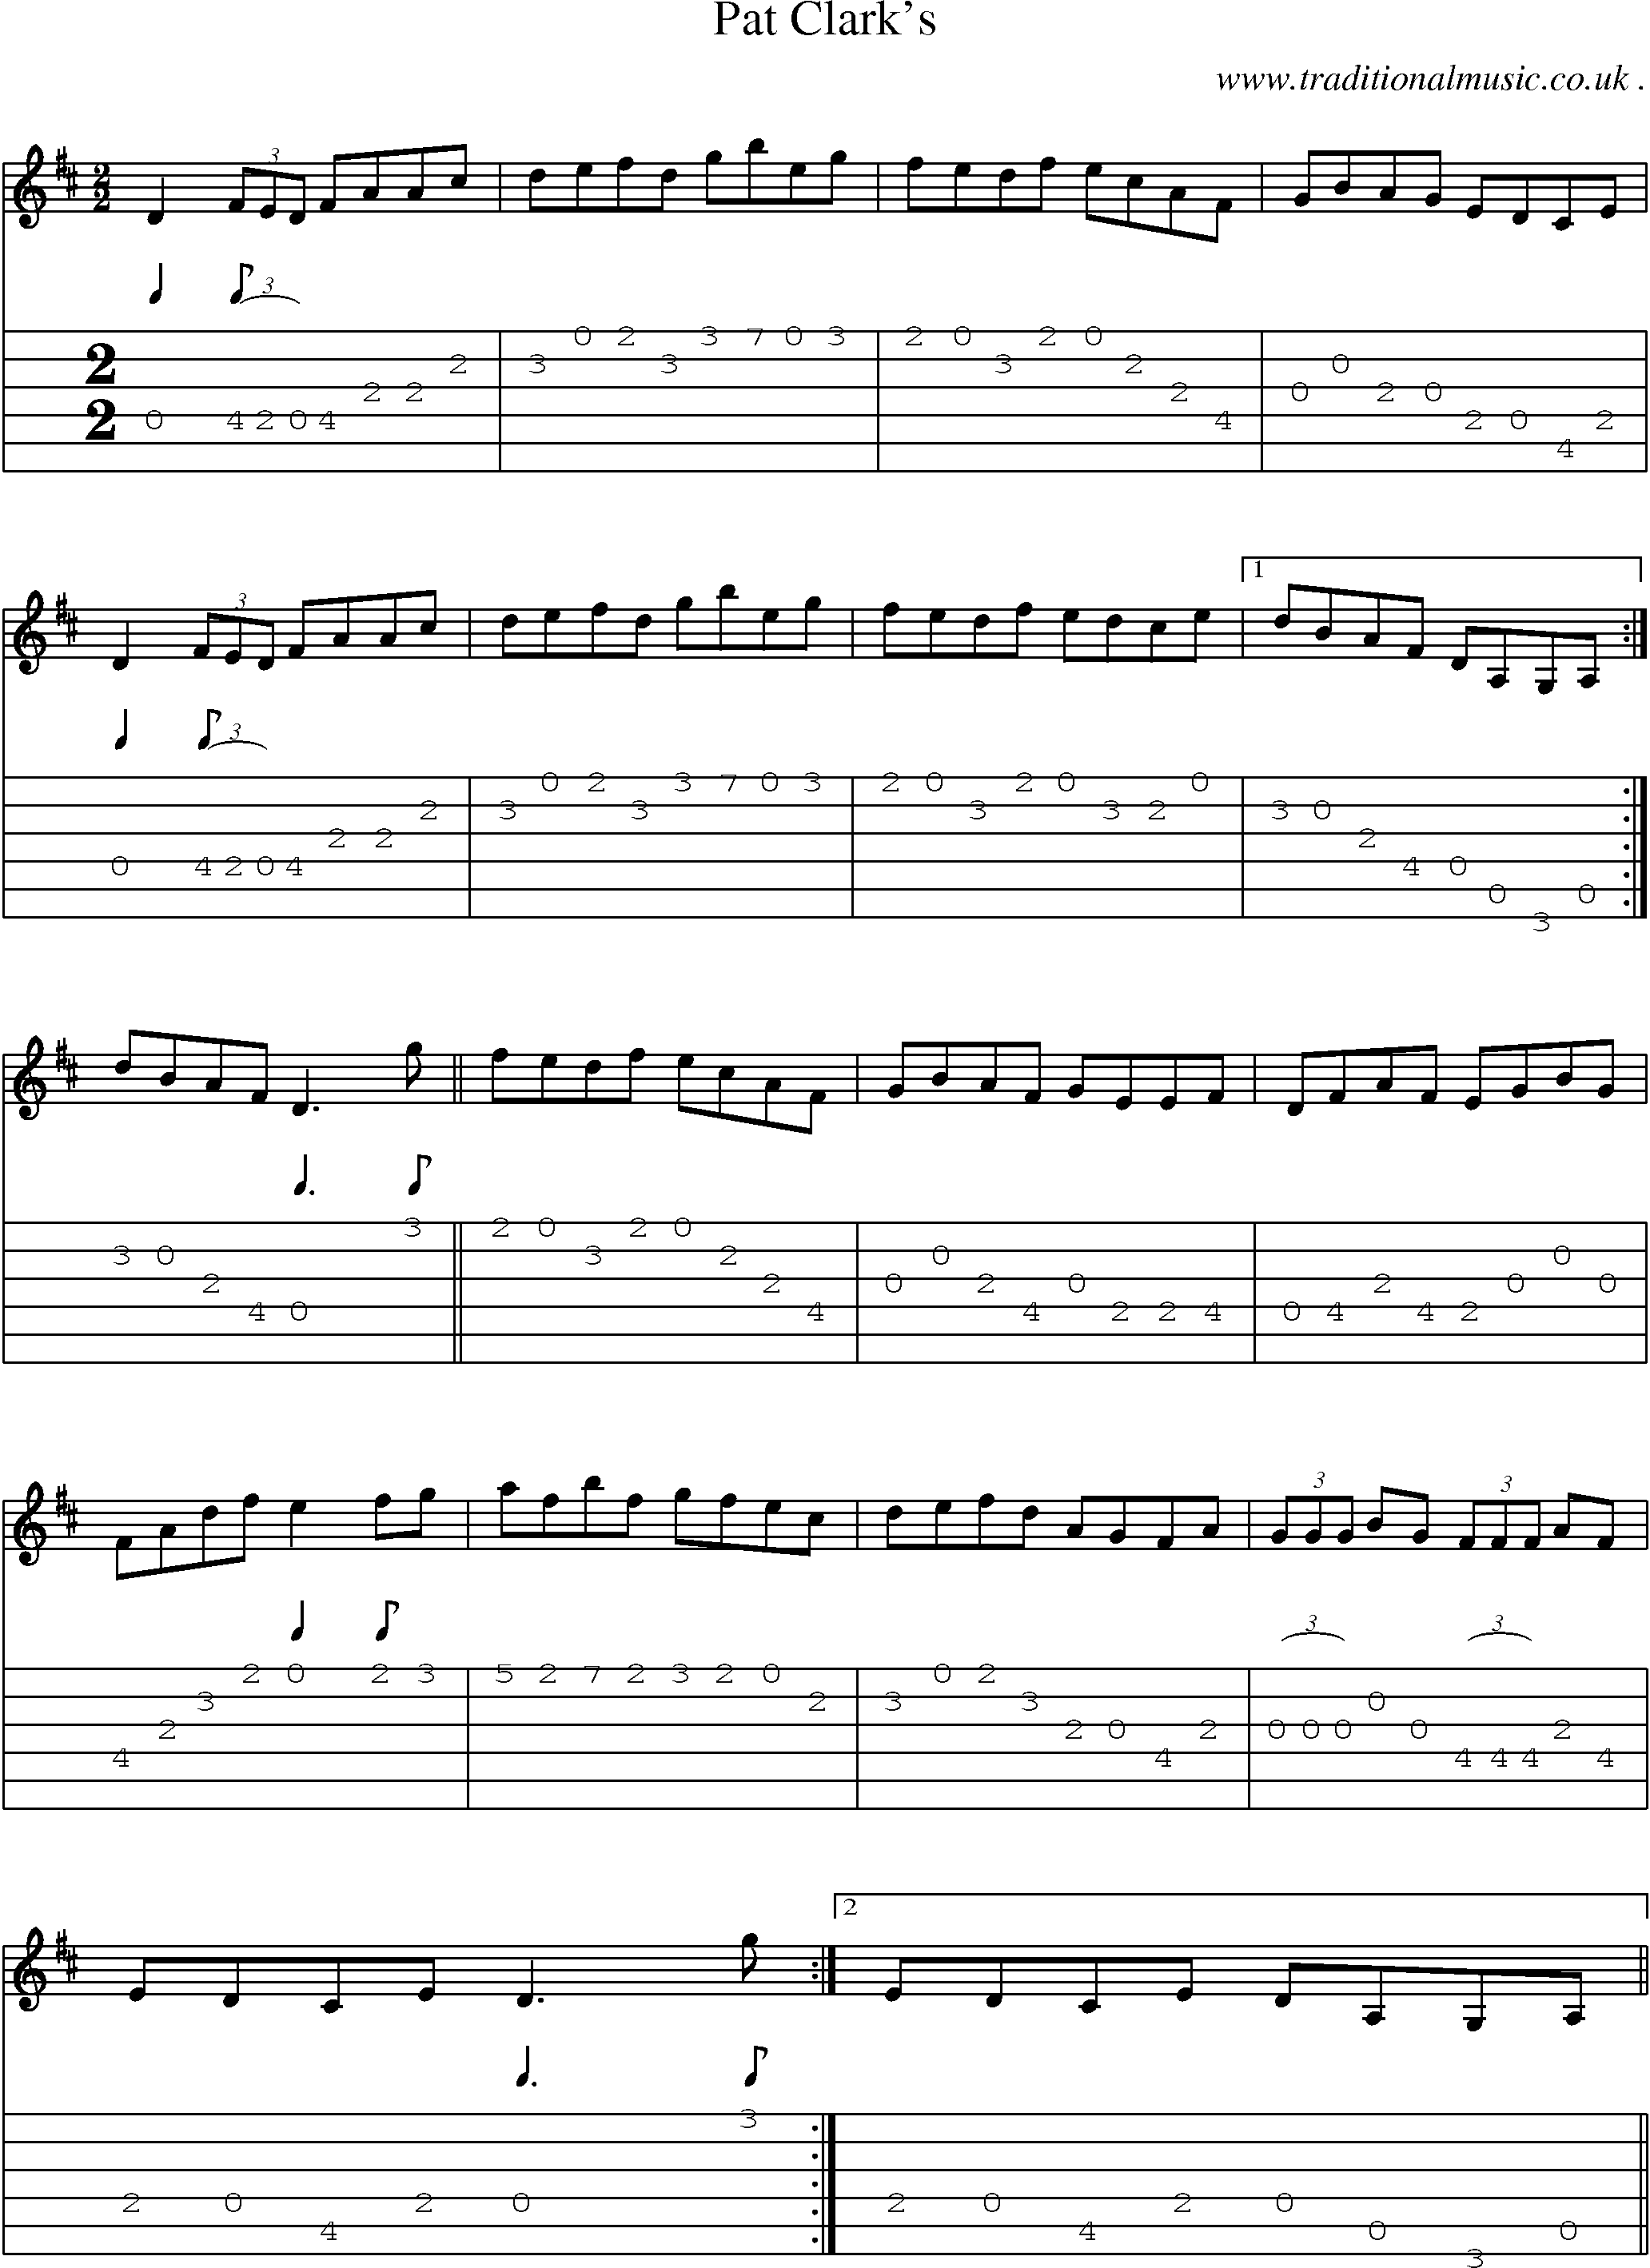 Sheet-Music and Guitar Tabs for Pat Clarks